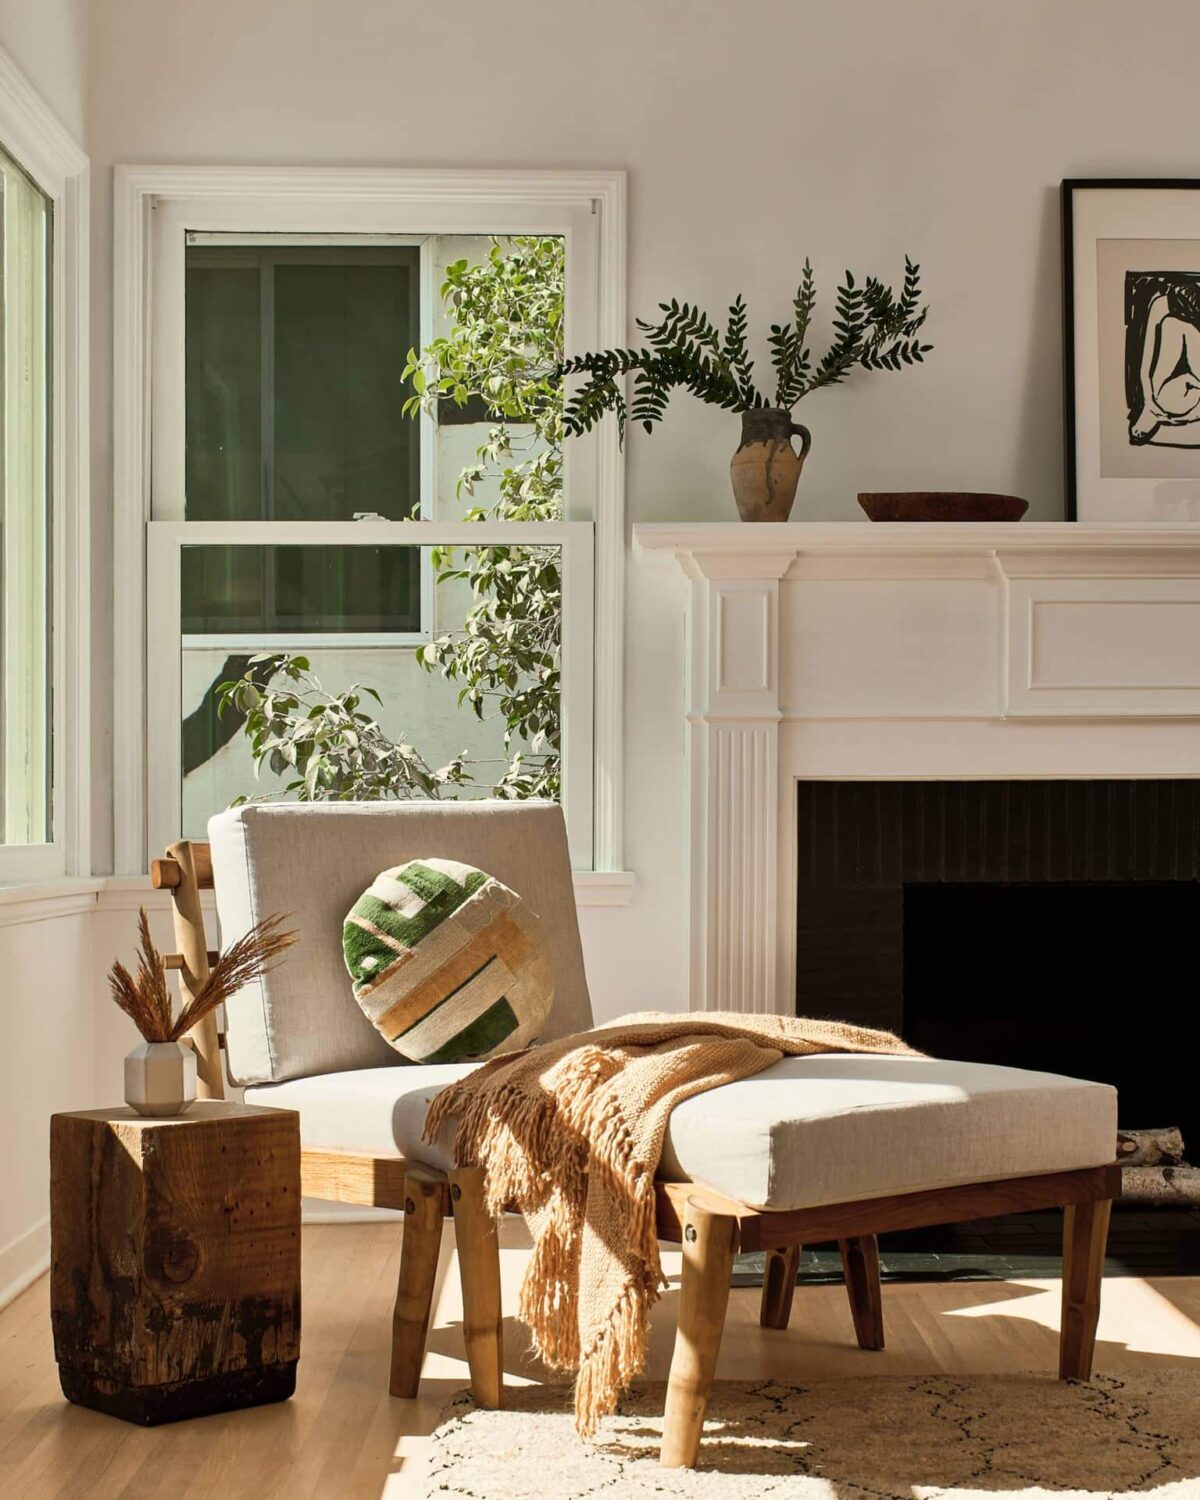 warm-los-angeles-sitting-room-chaise-longue-fireplace-nordroom